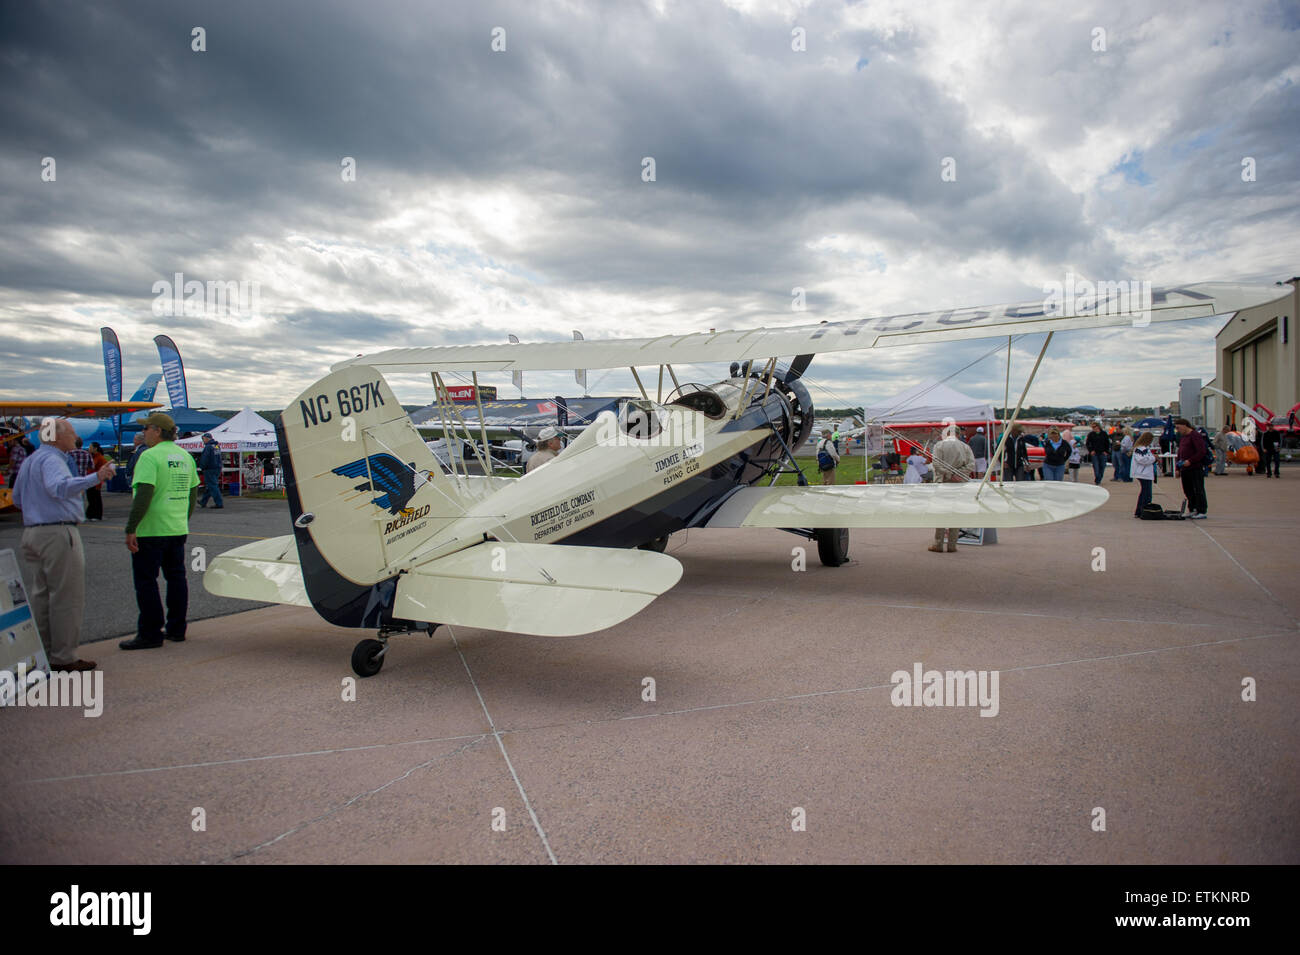 Biplane on display at air show in Creswell, Maryland, USA Stock Photo